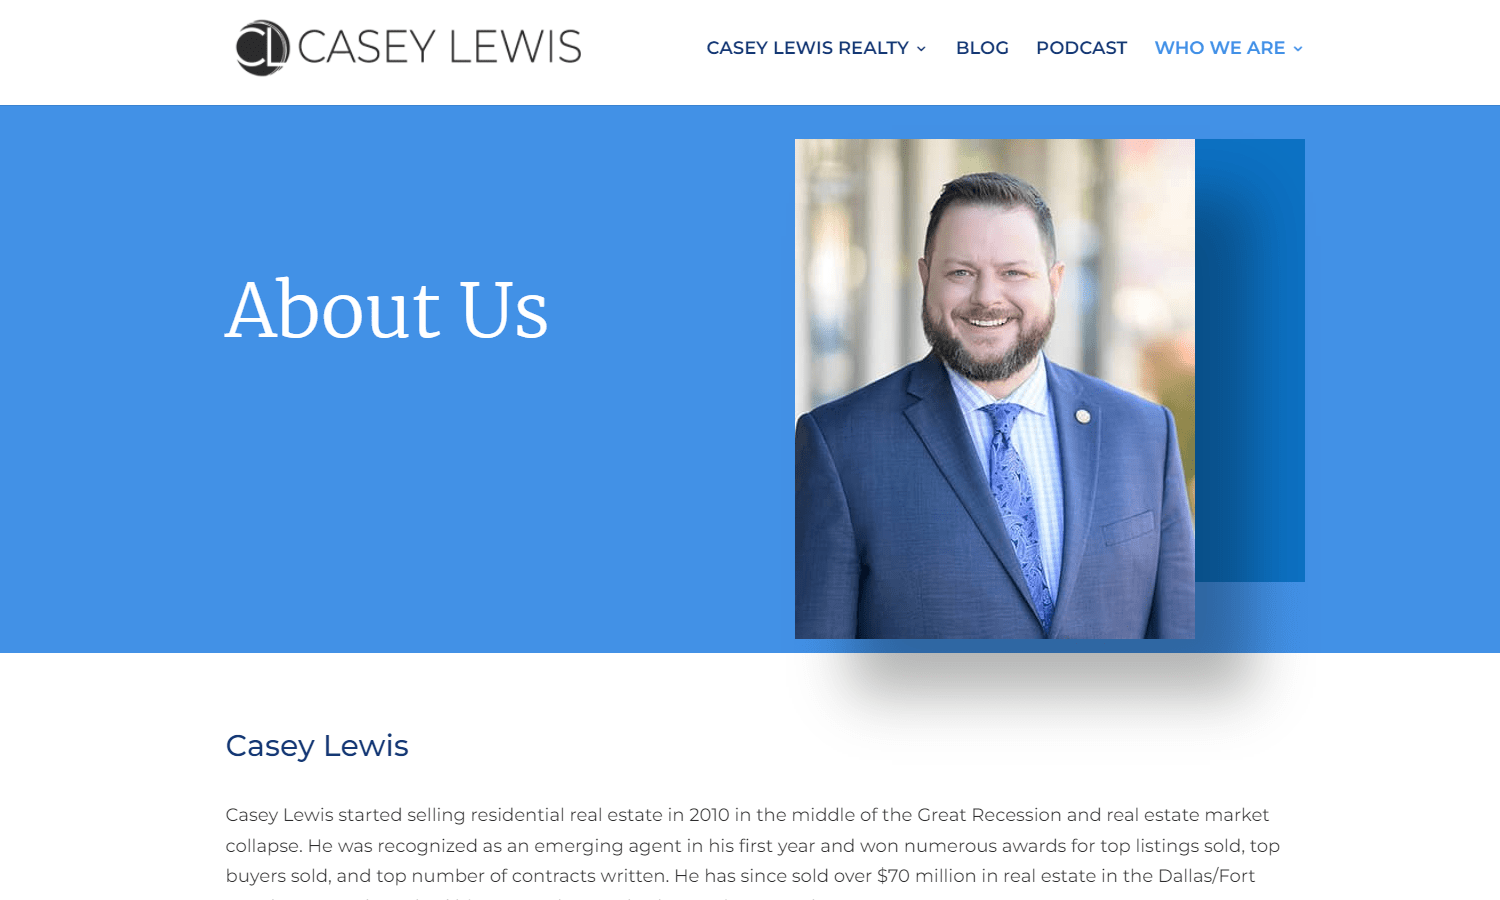 Casey Lewis Realty Website Design - About